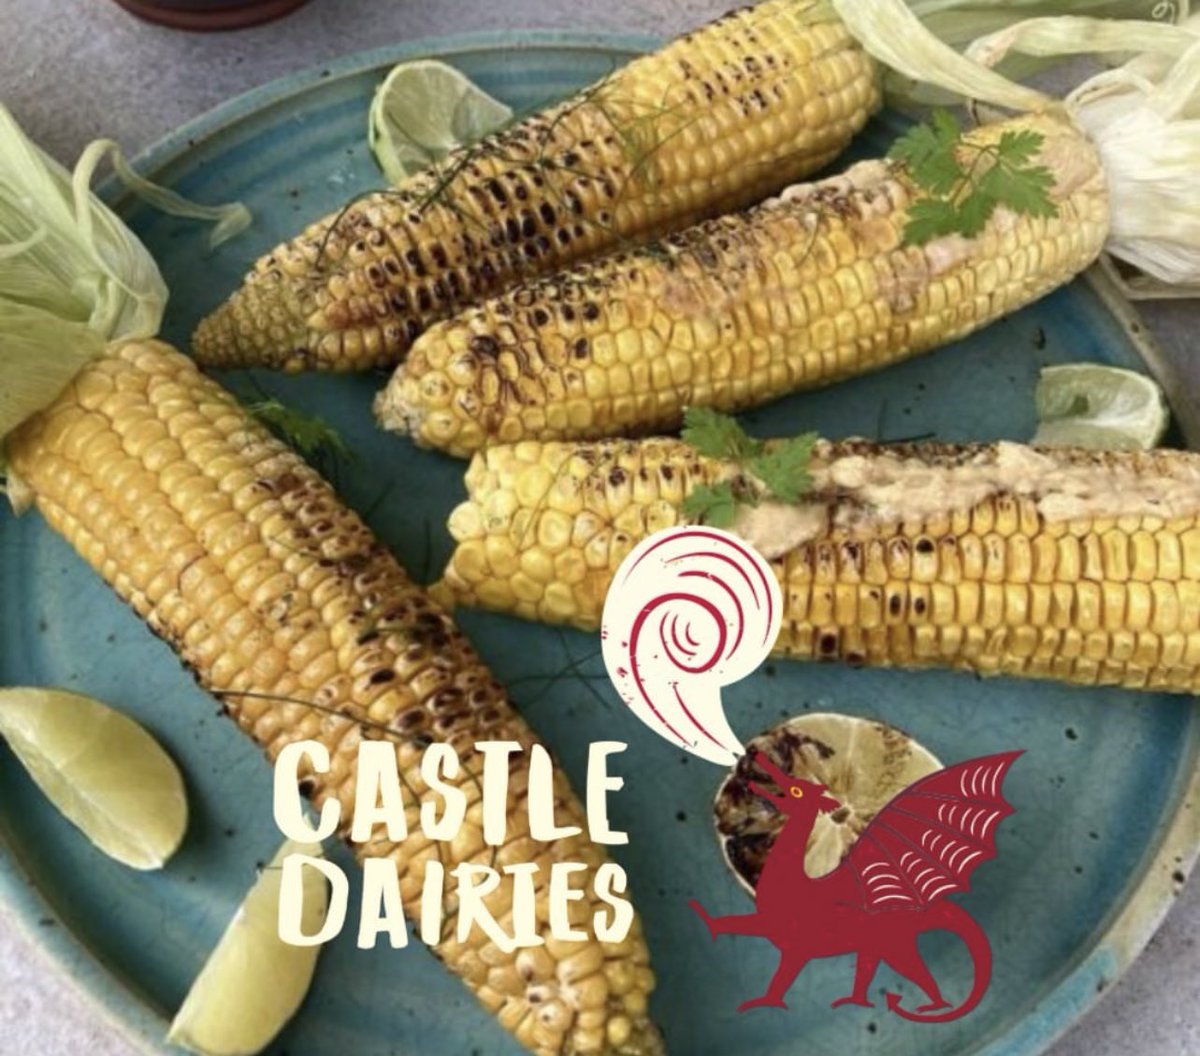 We can’t wait to fire up the BBQ & cook some corn🌽. But do you know what takes it to a whole new level? Smothering it in Castle Dairies’ delicious butter. The richness of our butter enhances the natural sweetness of the corn, making it an absolute treat for the taste buds!😋